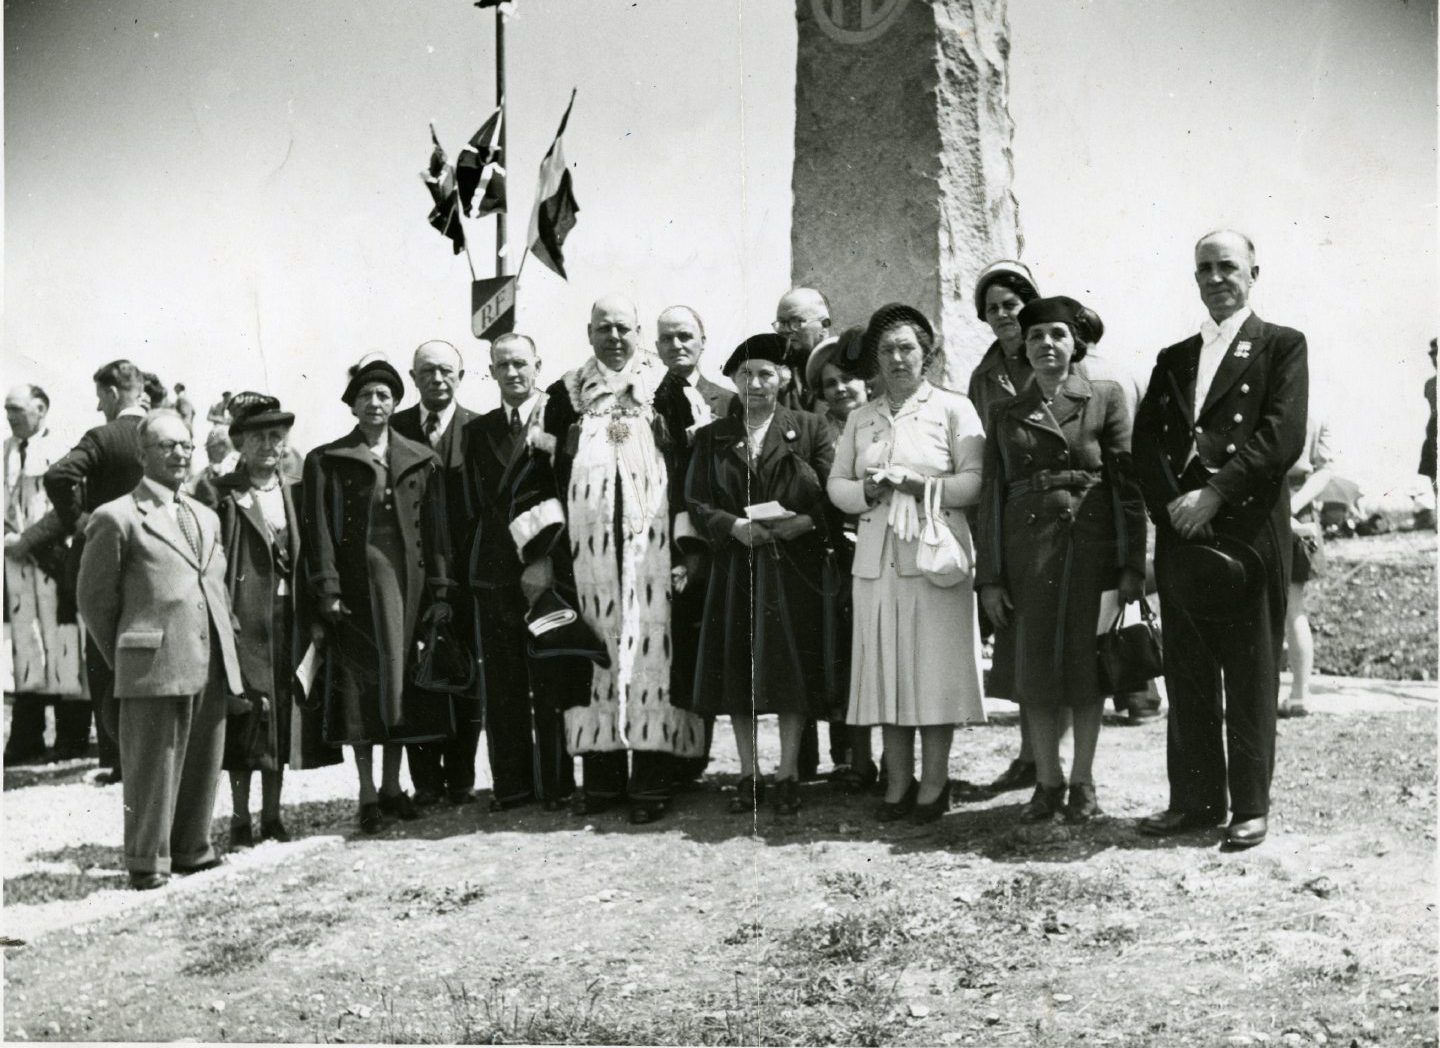 Lord Provost Richard Fenton and a delegation from the city visiting a memorial at St Valery, France, in May 1950.